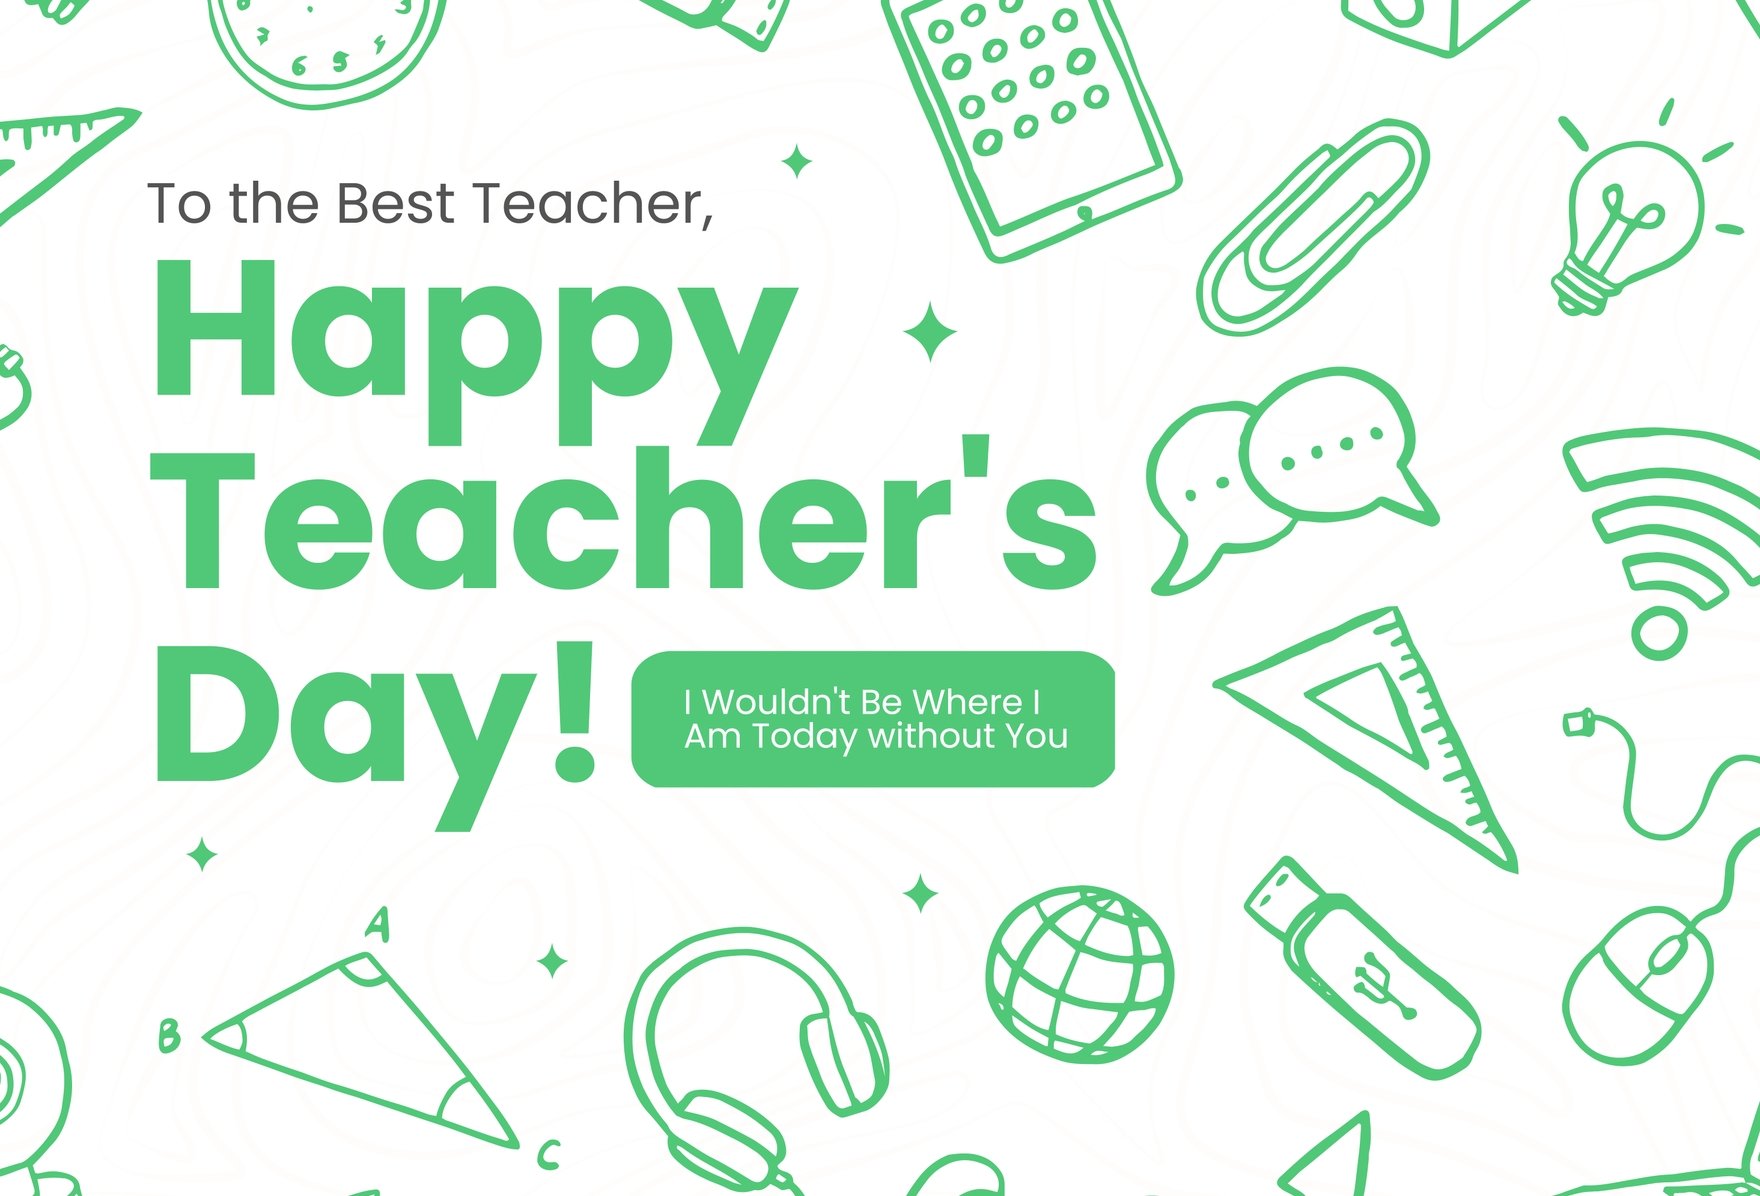 Free Teacher's Day Greetings Messages in Word, Illustrator, PSD